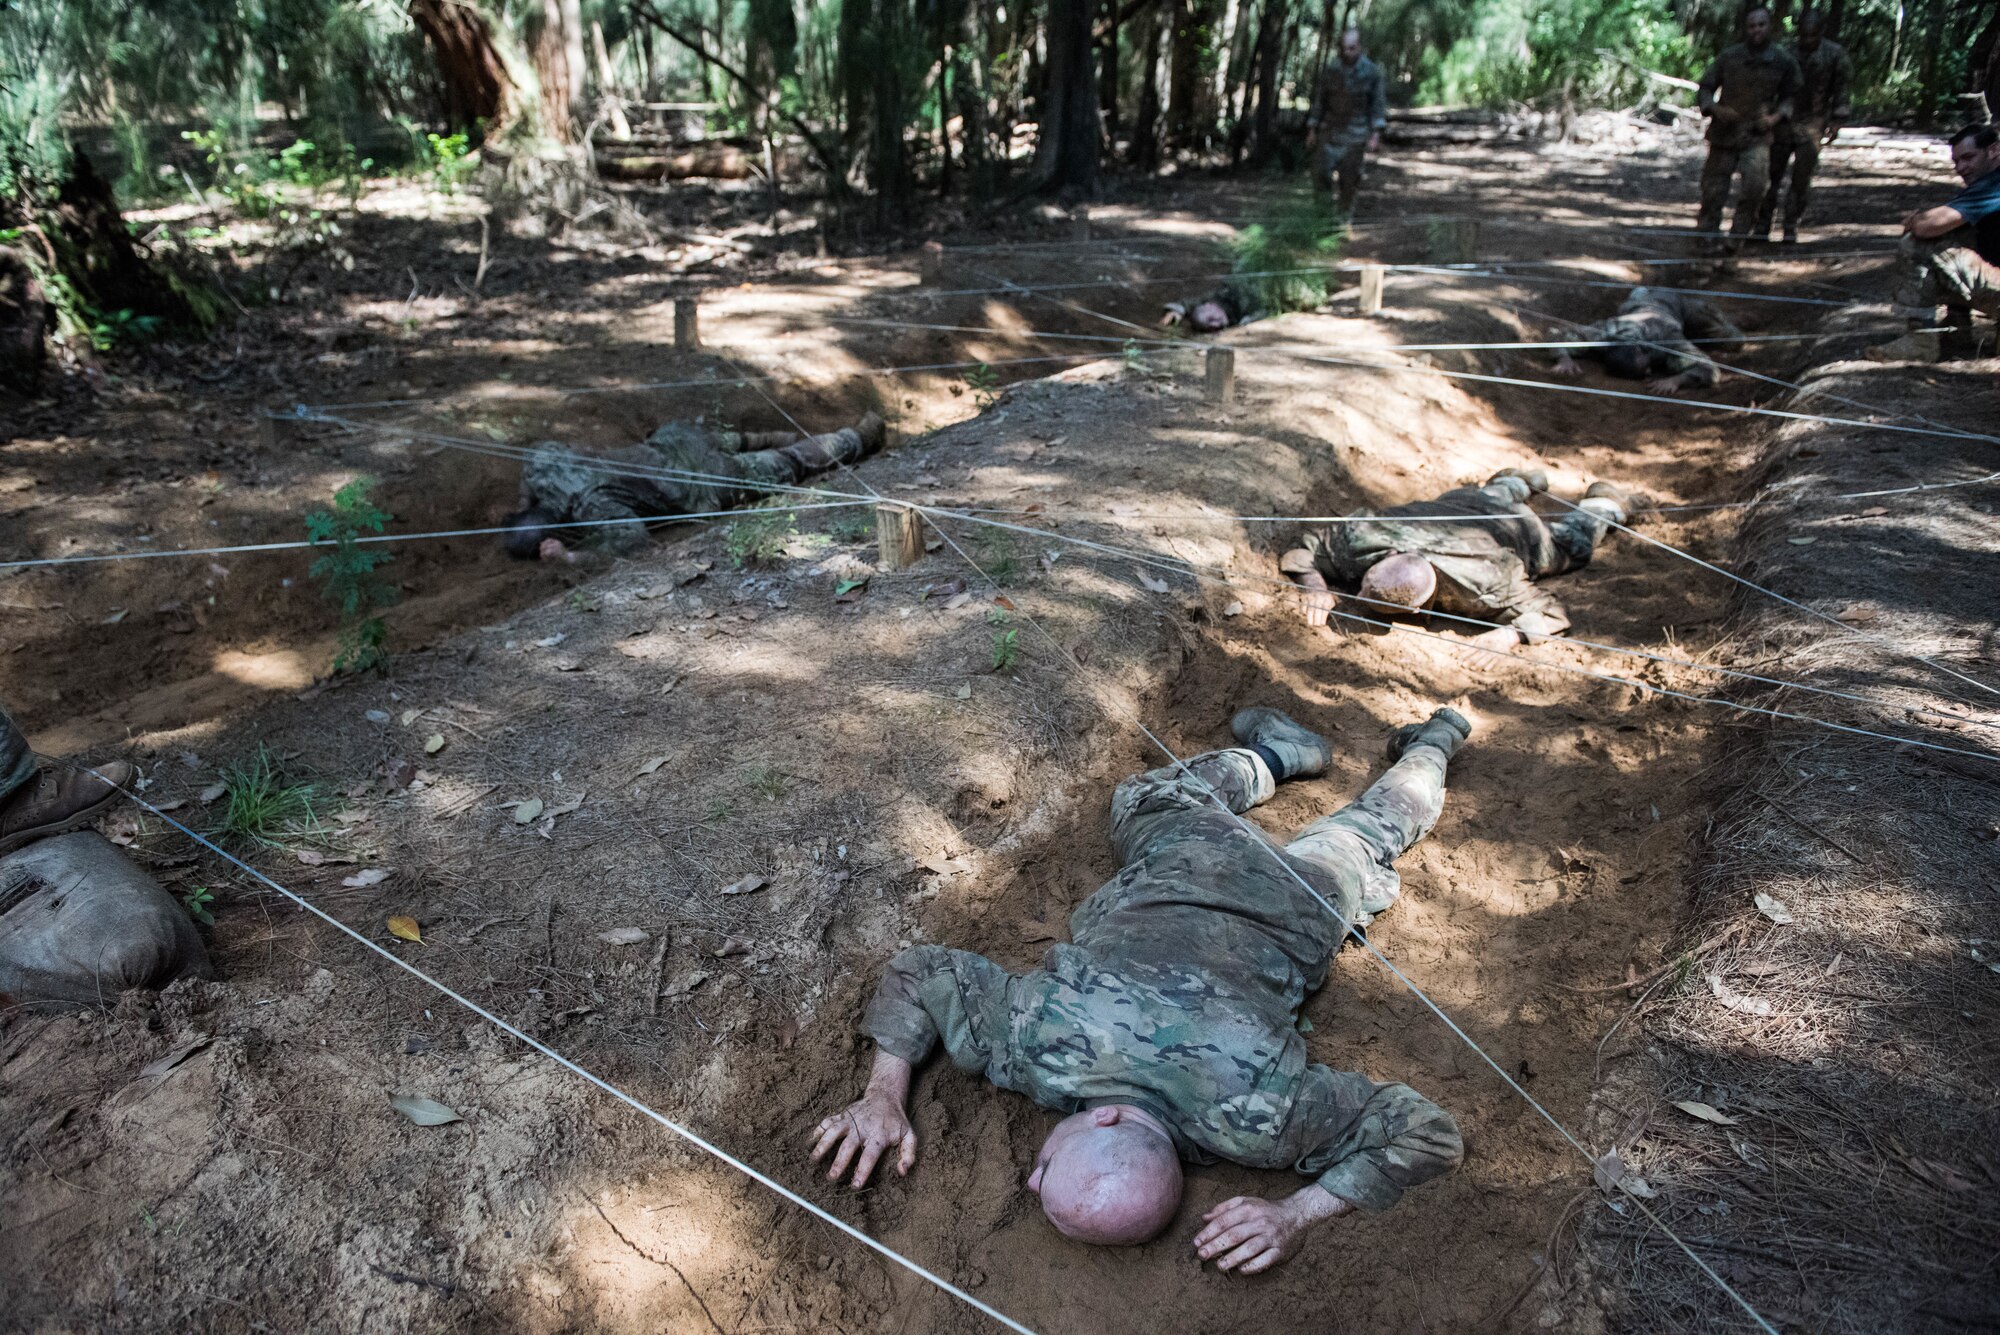 Ranger Assessment Course students low-crawl during the obstacle course for a Ranger Assessment Course near Schofield Barracks, Oahu, Hawaii, May 20, 2019. Throughout the 19-day course, Airmen were tested on their ability to perform land navigation, ambush, react to contact and squad attacks. Along with those assessments, the students went on runs and marches of different distances – all leading up to a 12-mile ruck march two days before graduation. (U.S. Air Force photo by Staff Sgt. Hailey Haux)